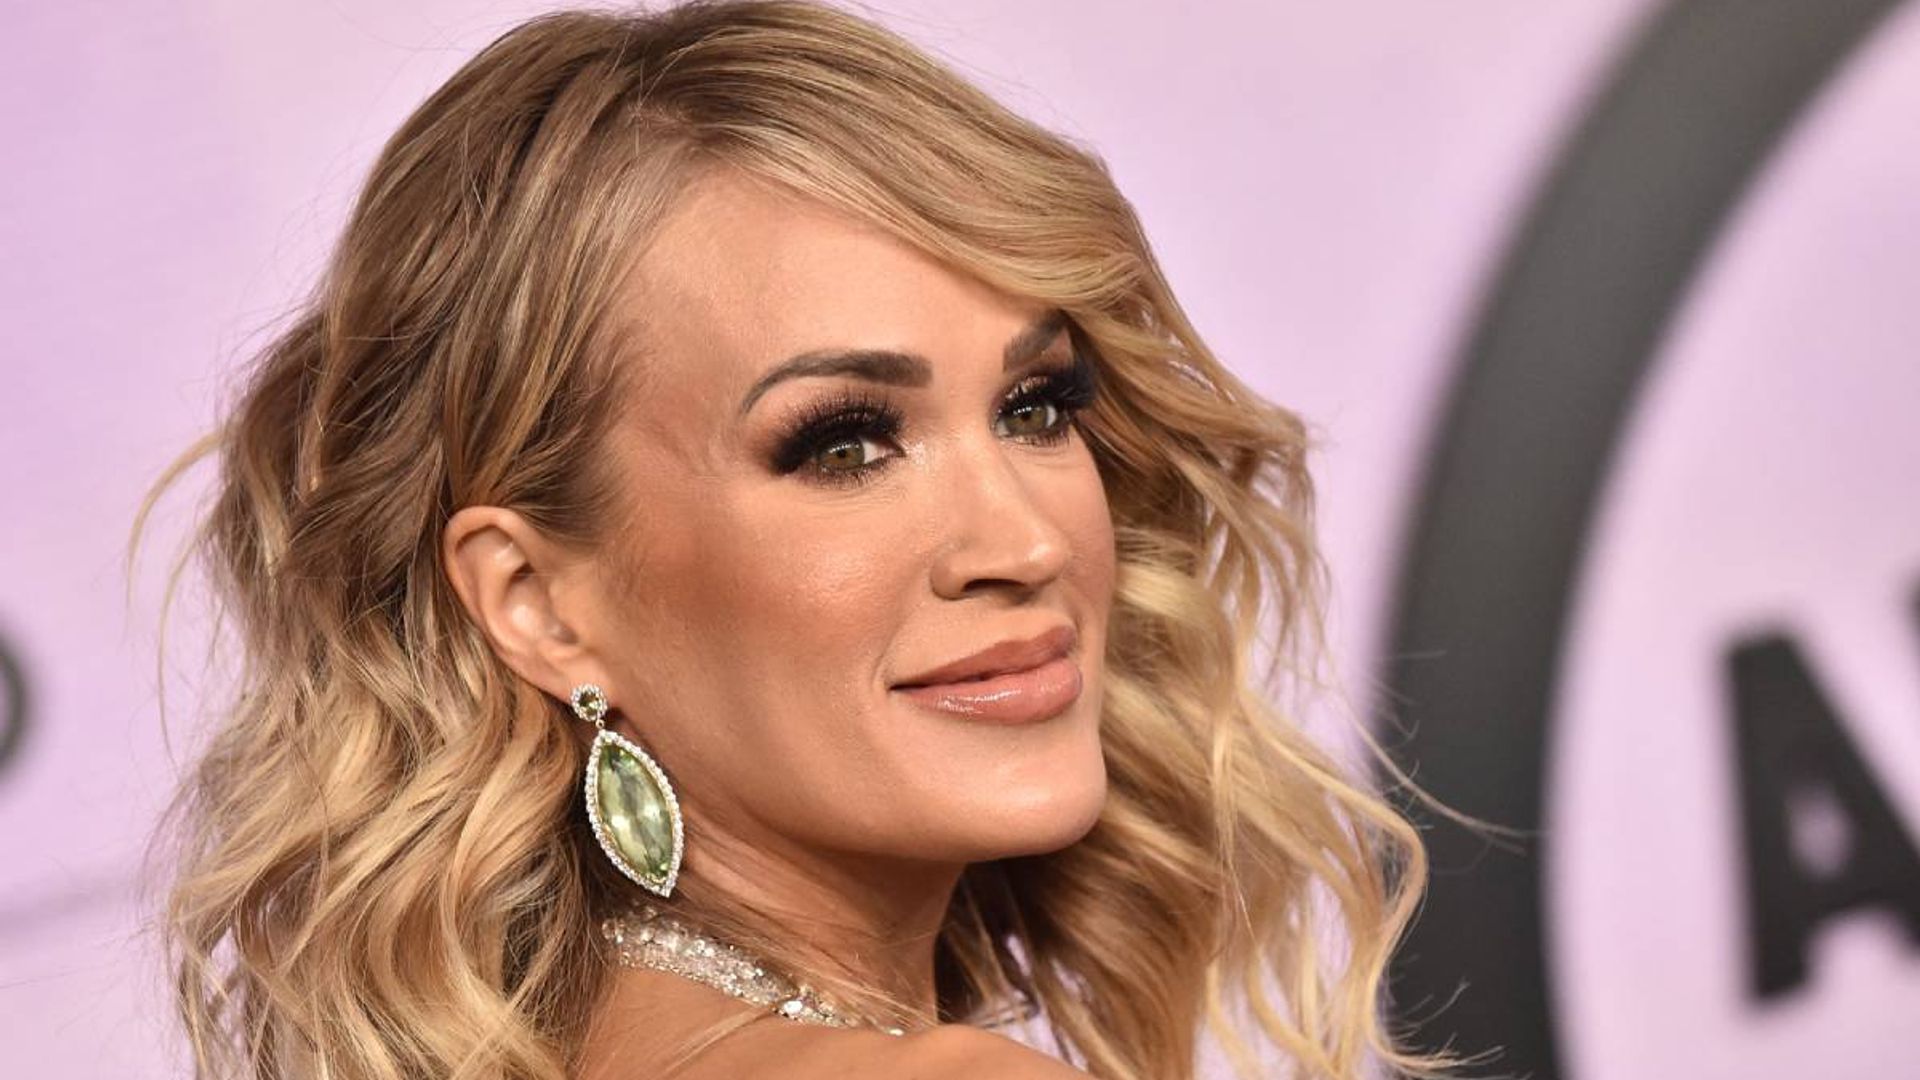 Carrie Underwood Shows Off Those Famous Sculpted Legs in Mini Denim Shorts